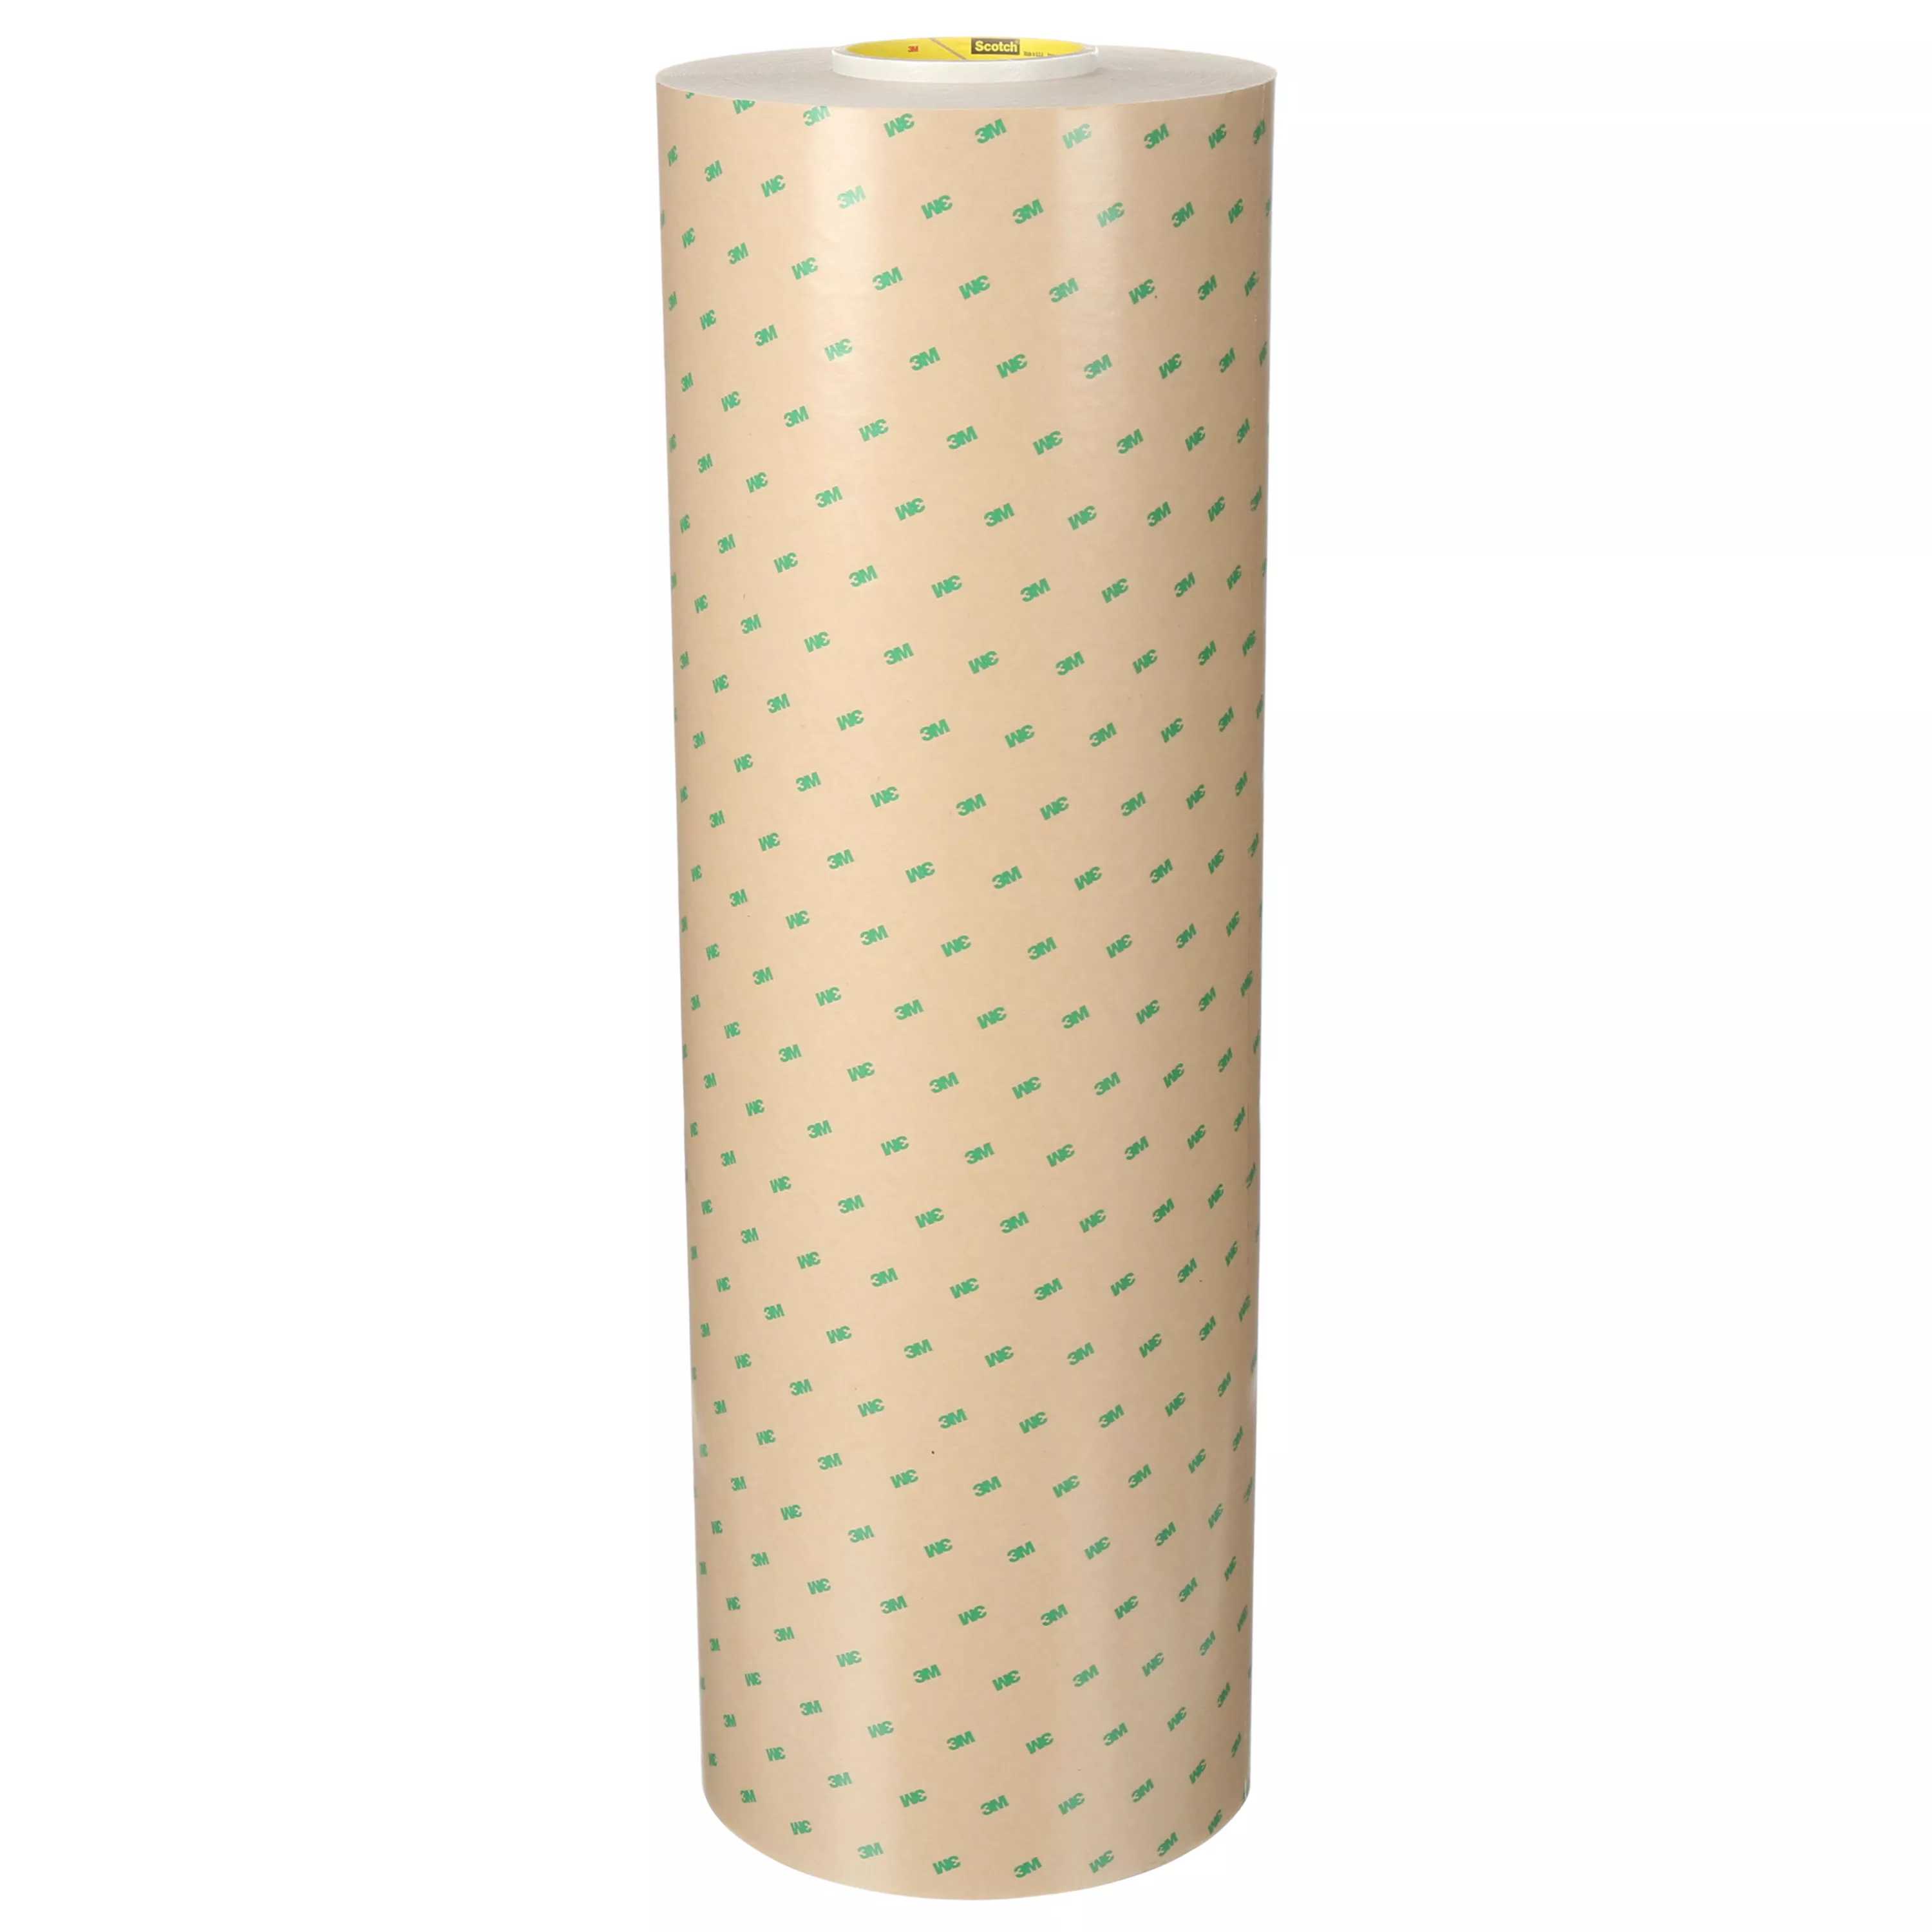 3M™ Adhesive Transfer Tape 9502, Clear, 48 in x 180 yd, 2 mil, 1
Roll/Case